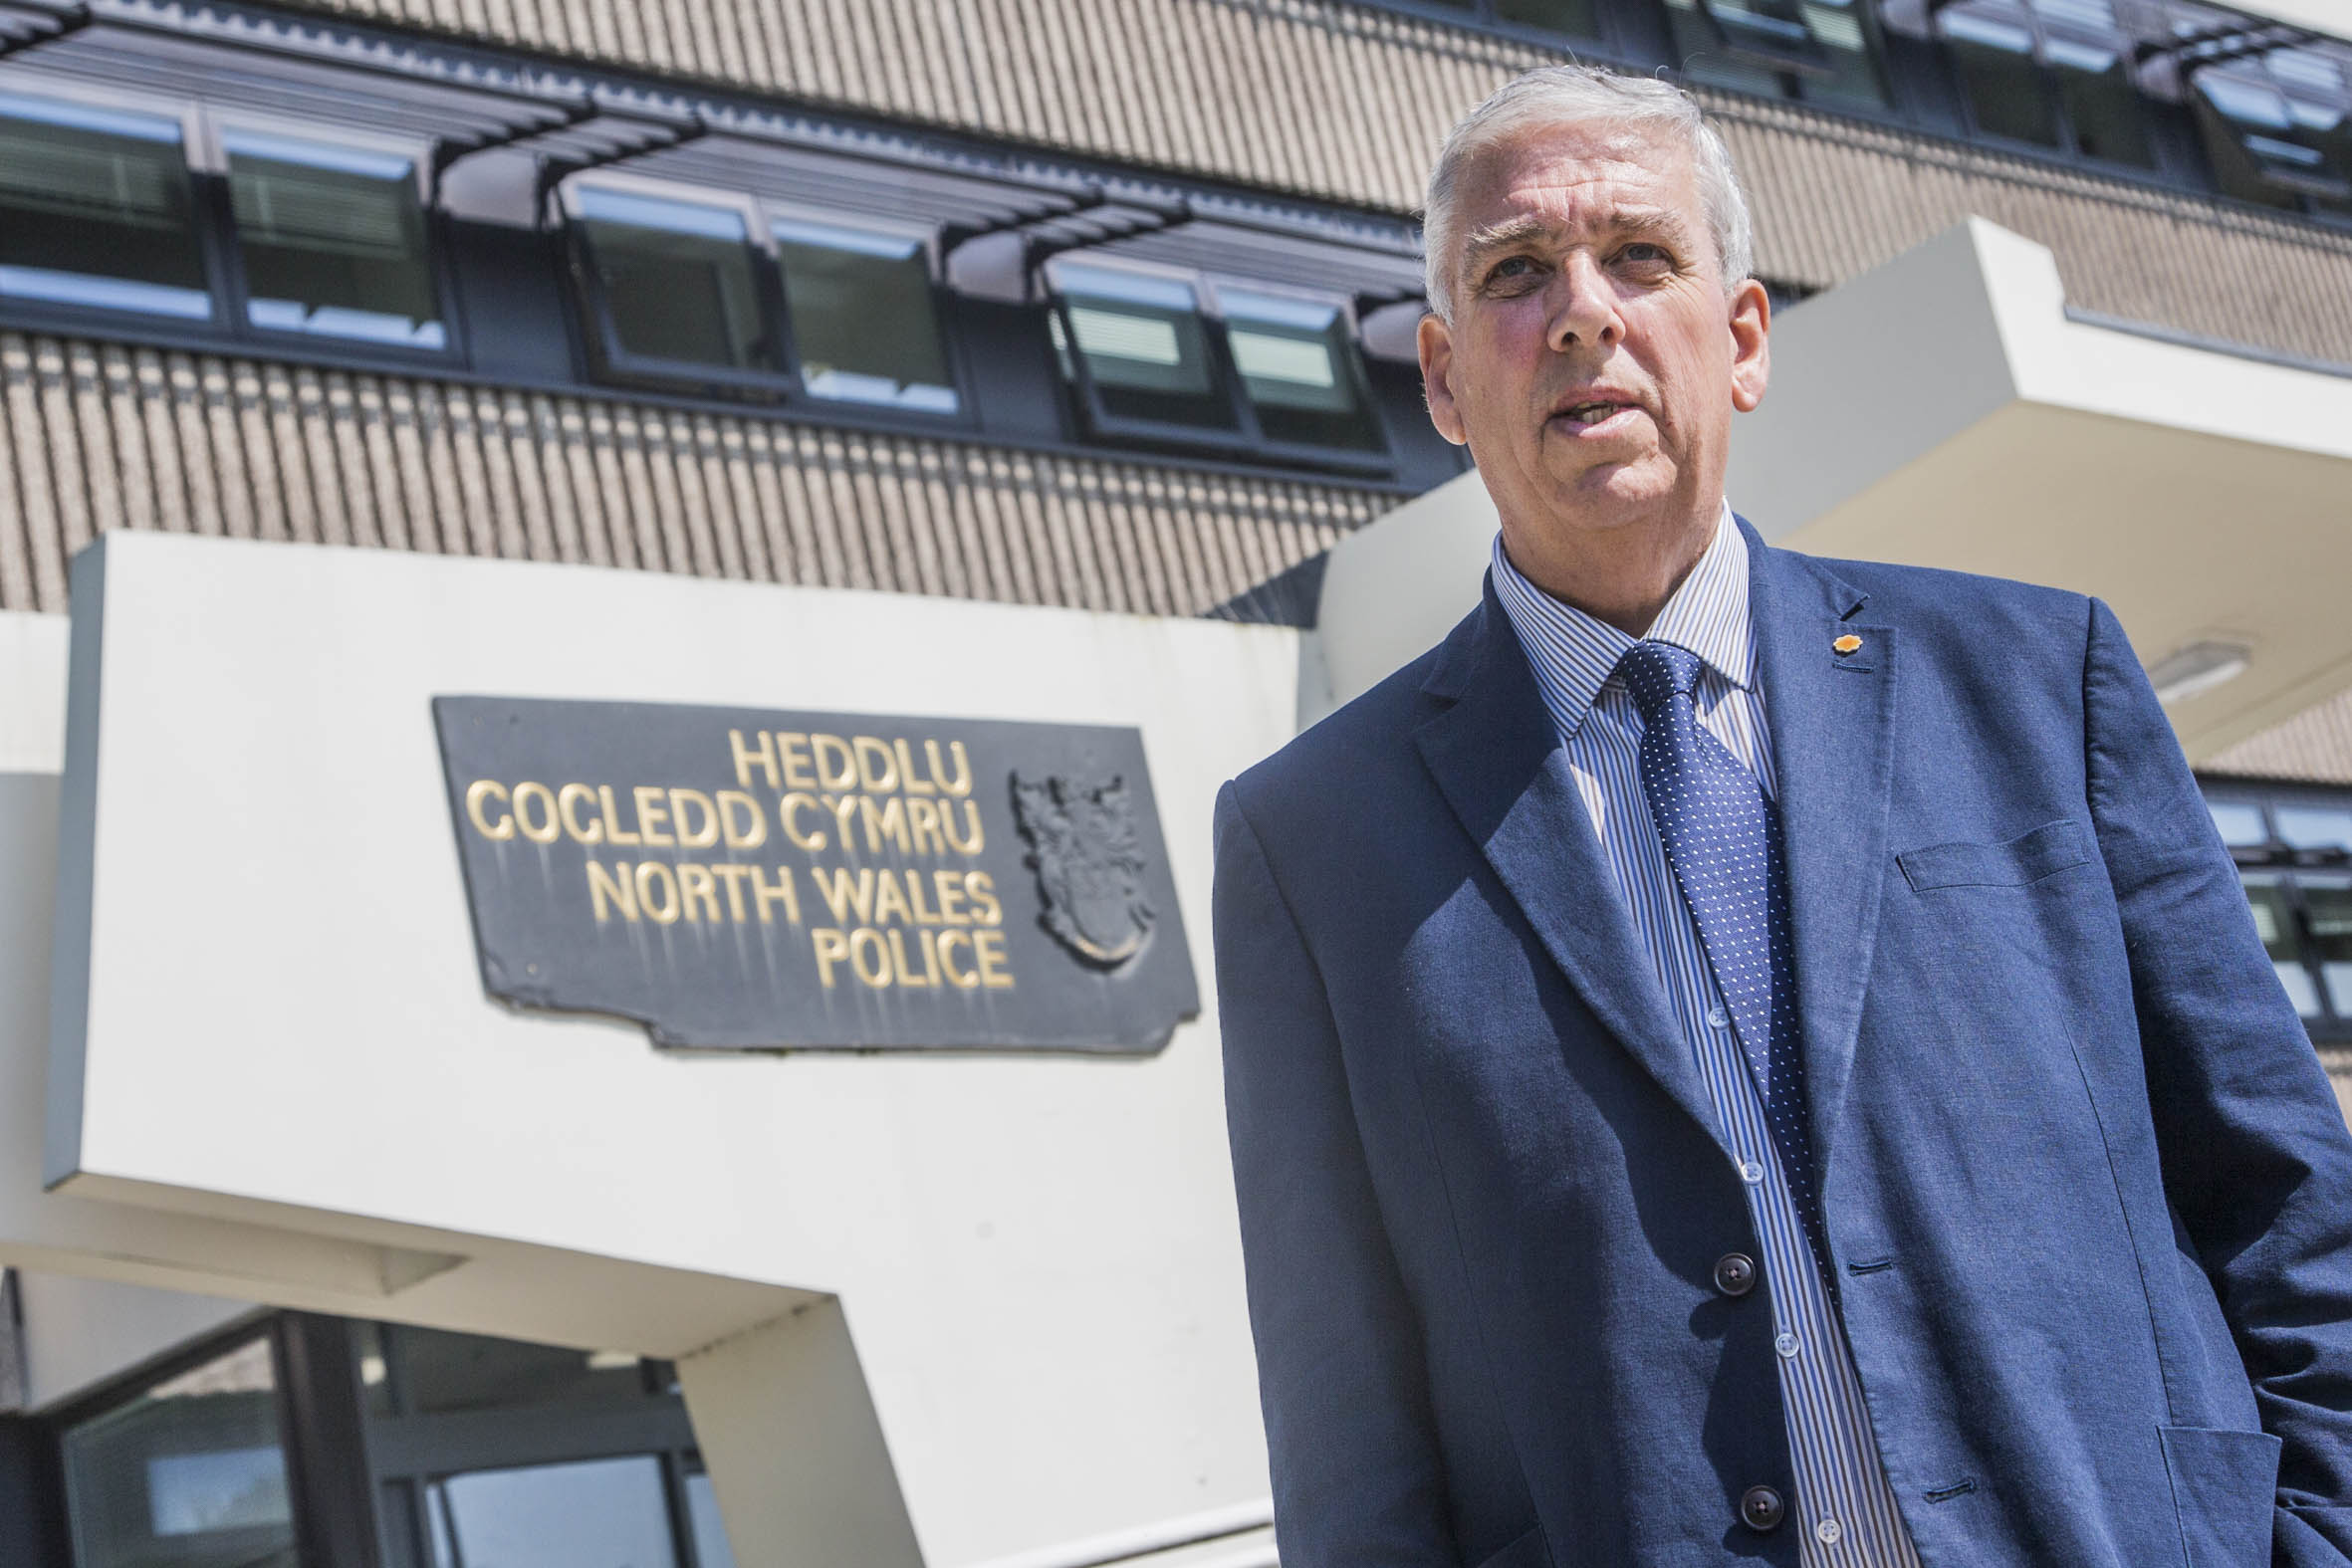 Police boss reveals one in four young people have suffered domestic violence and abuse